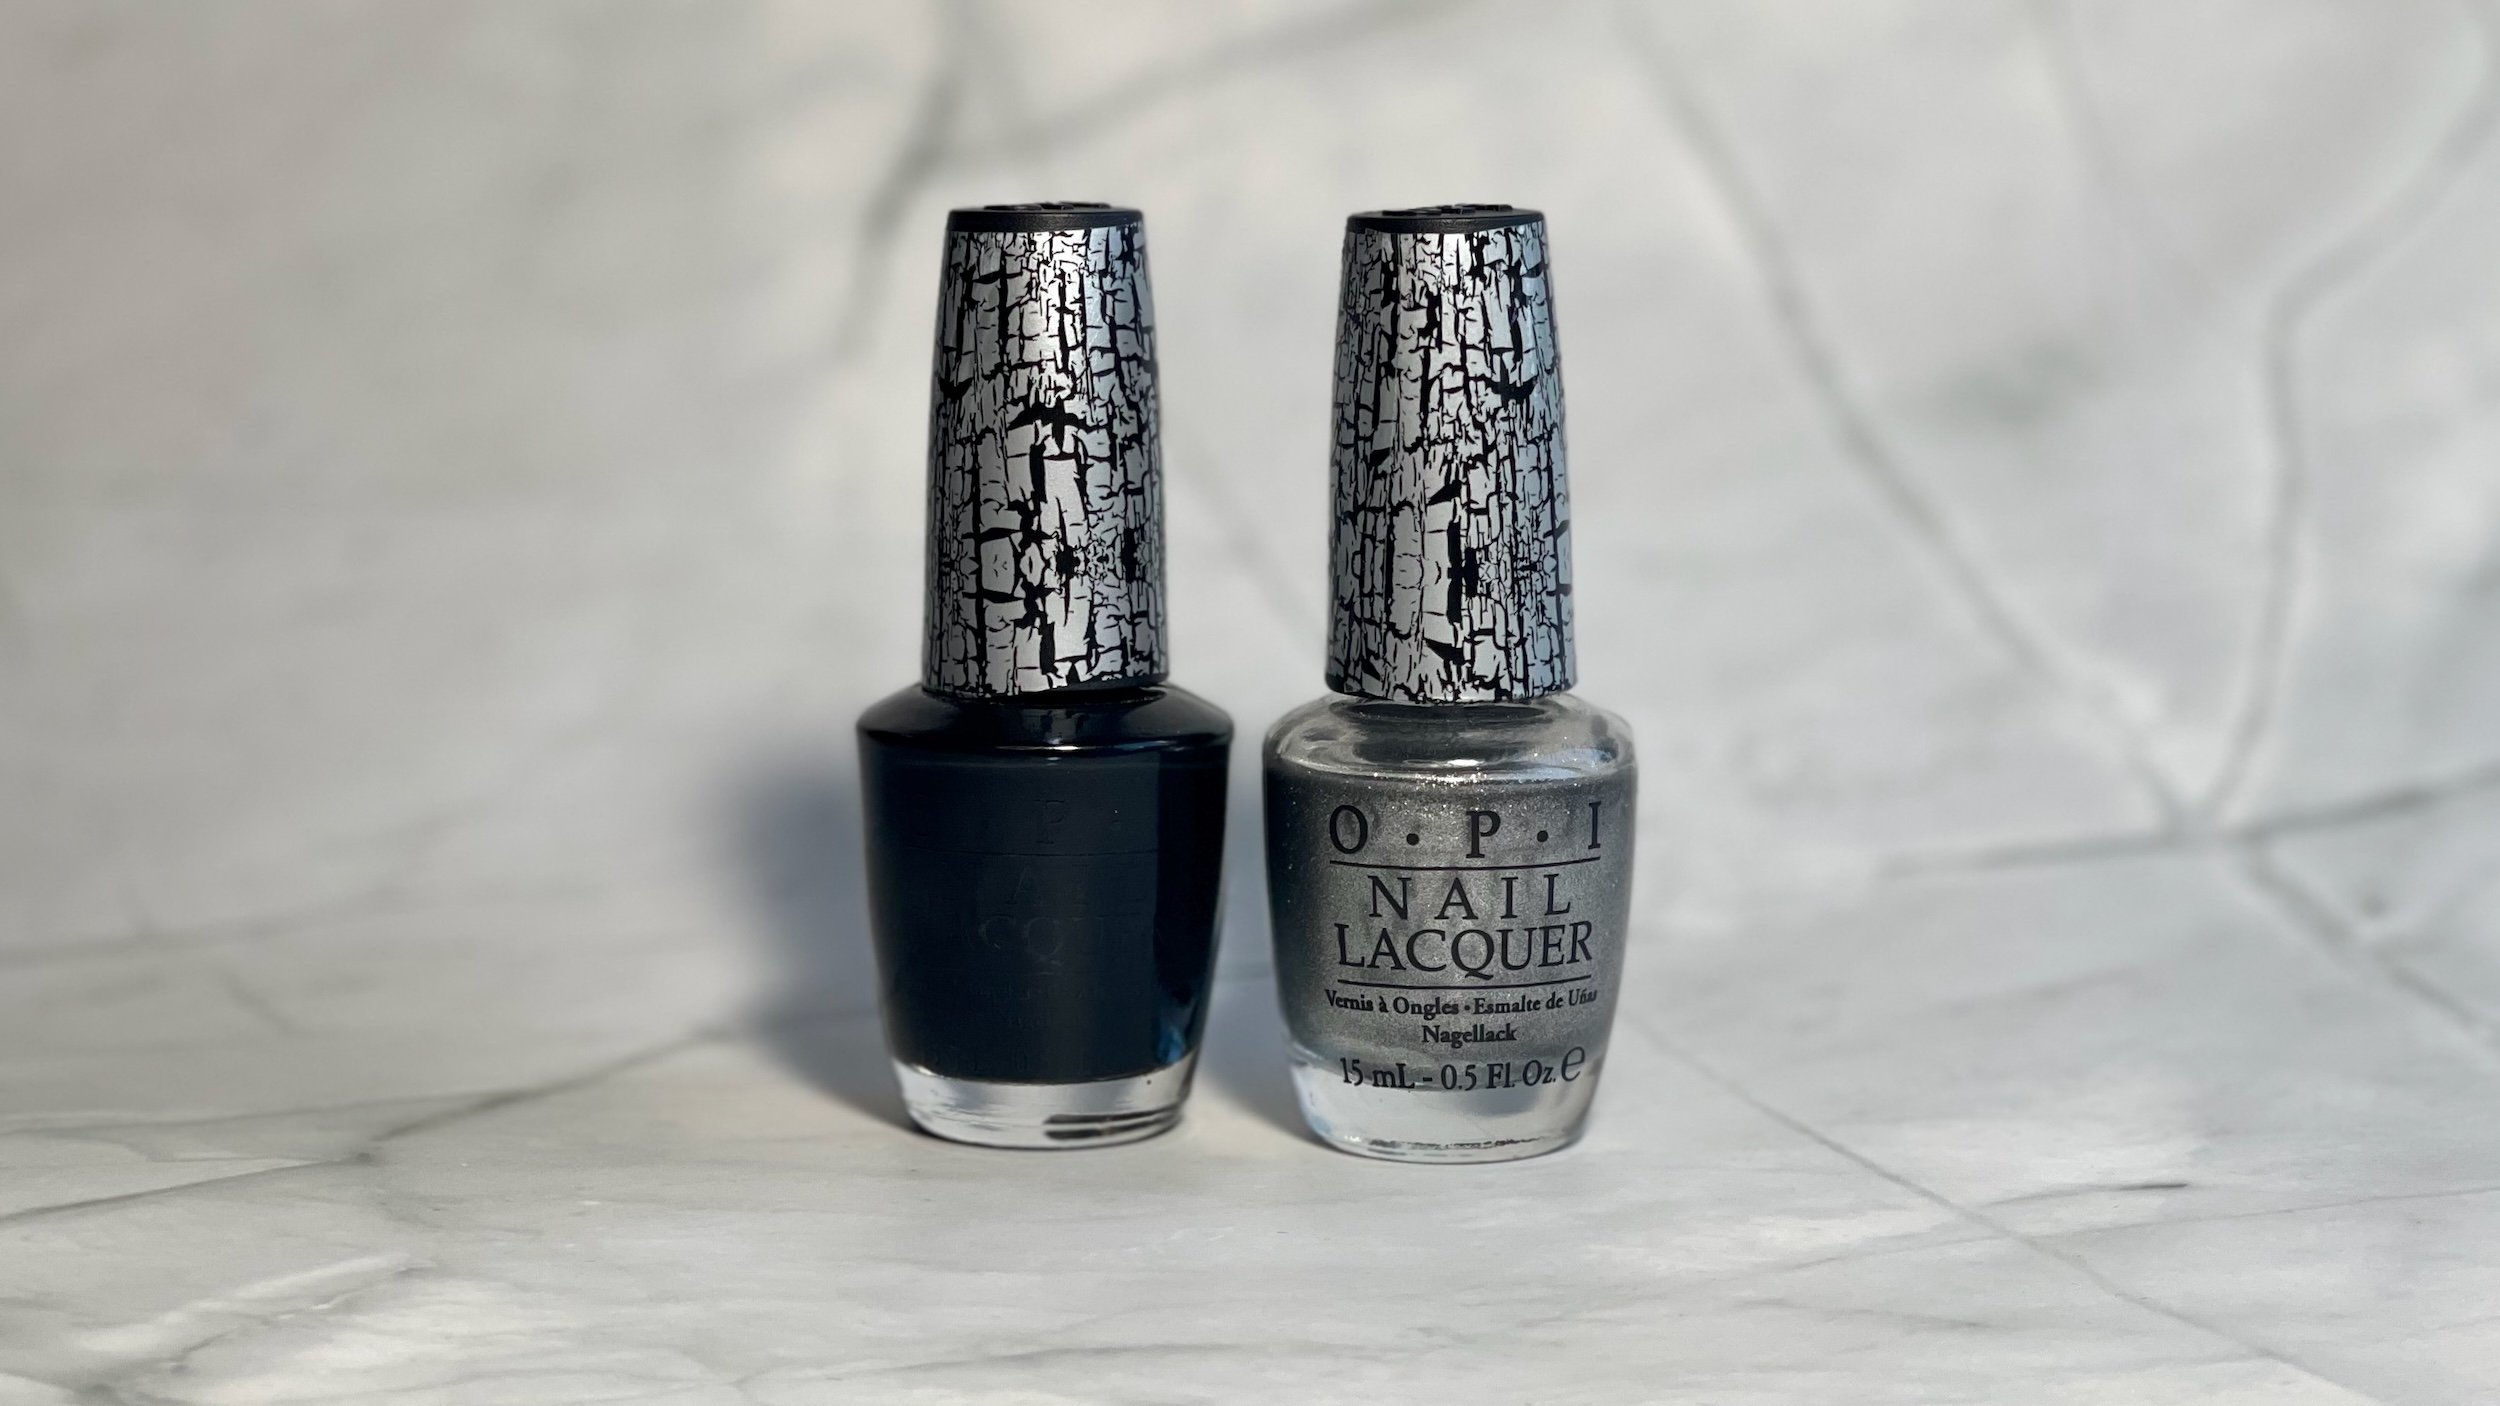 How to use crackle nail polish - Quora